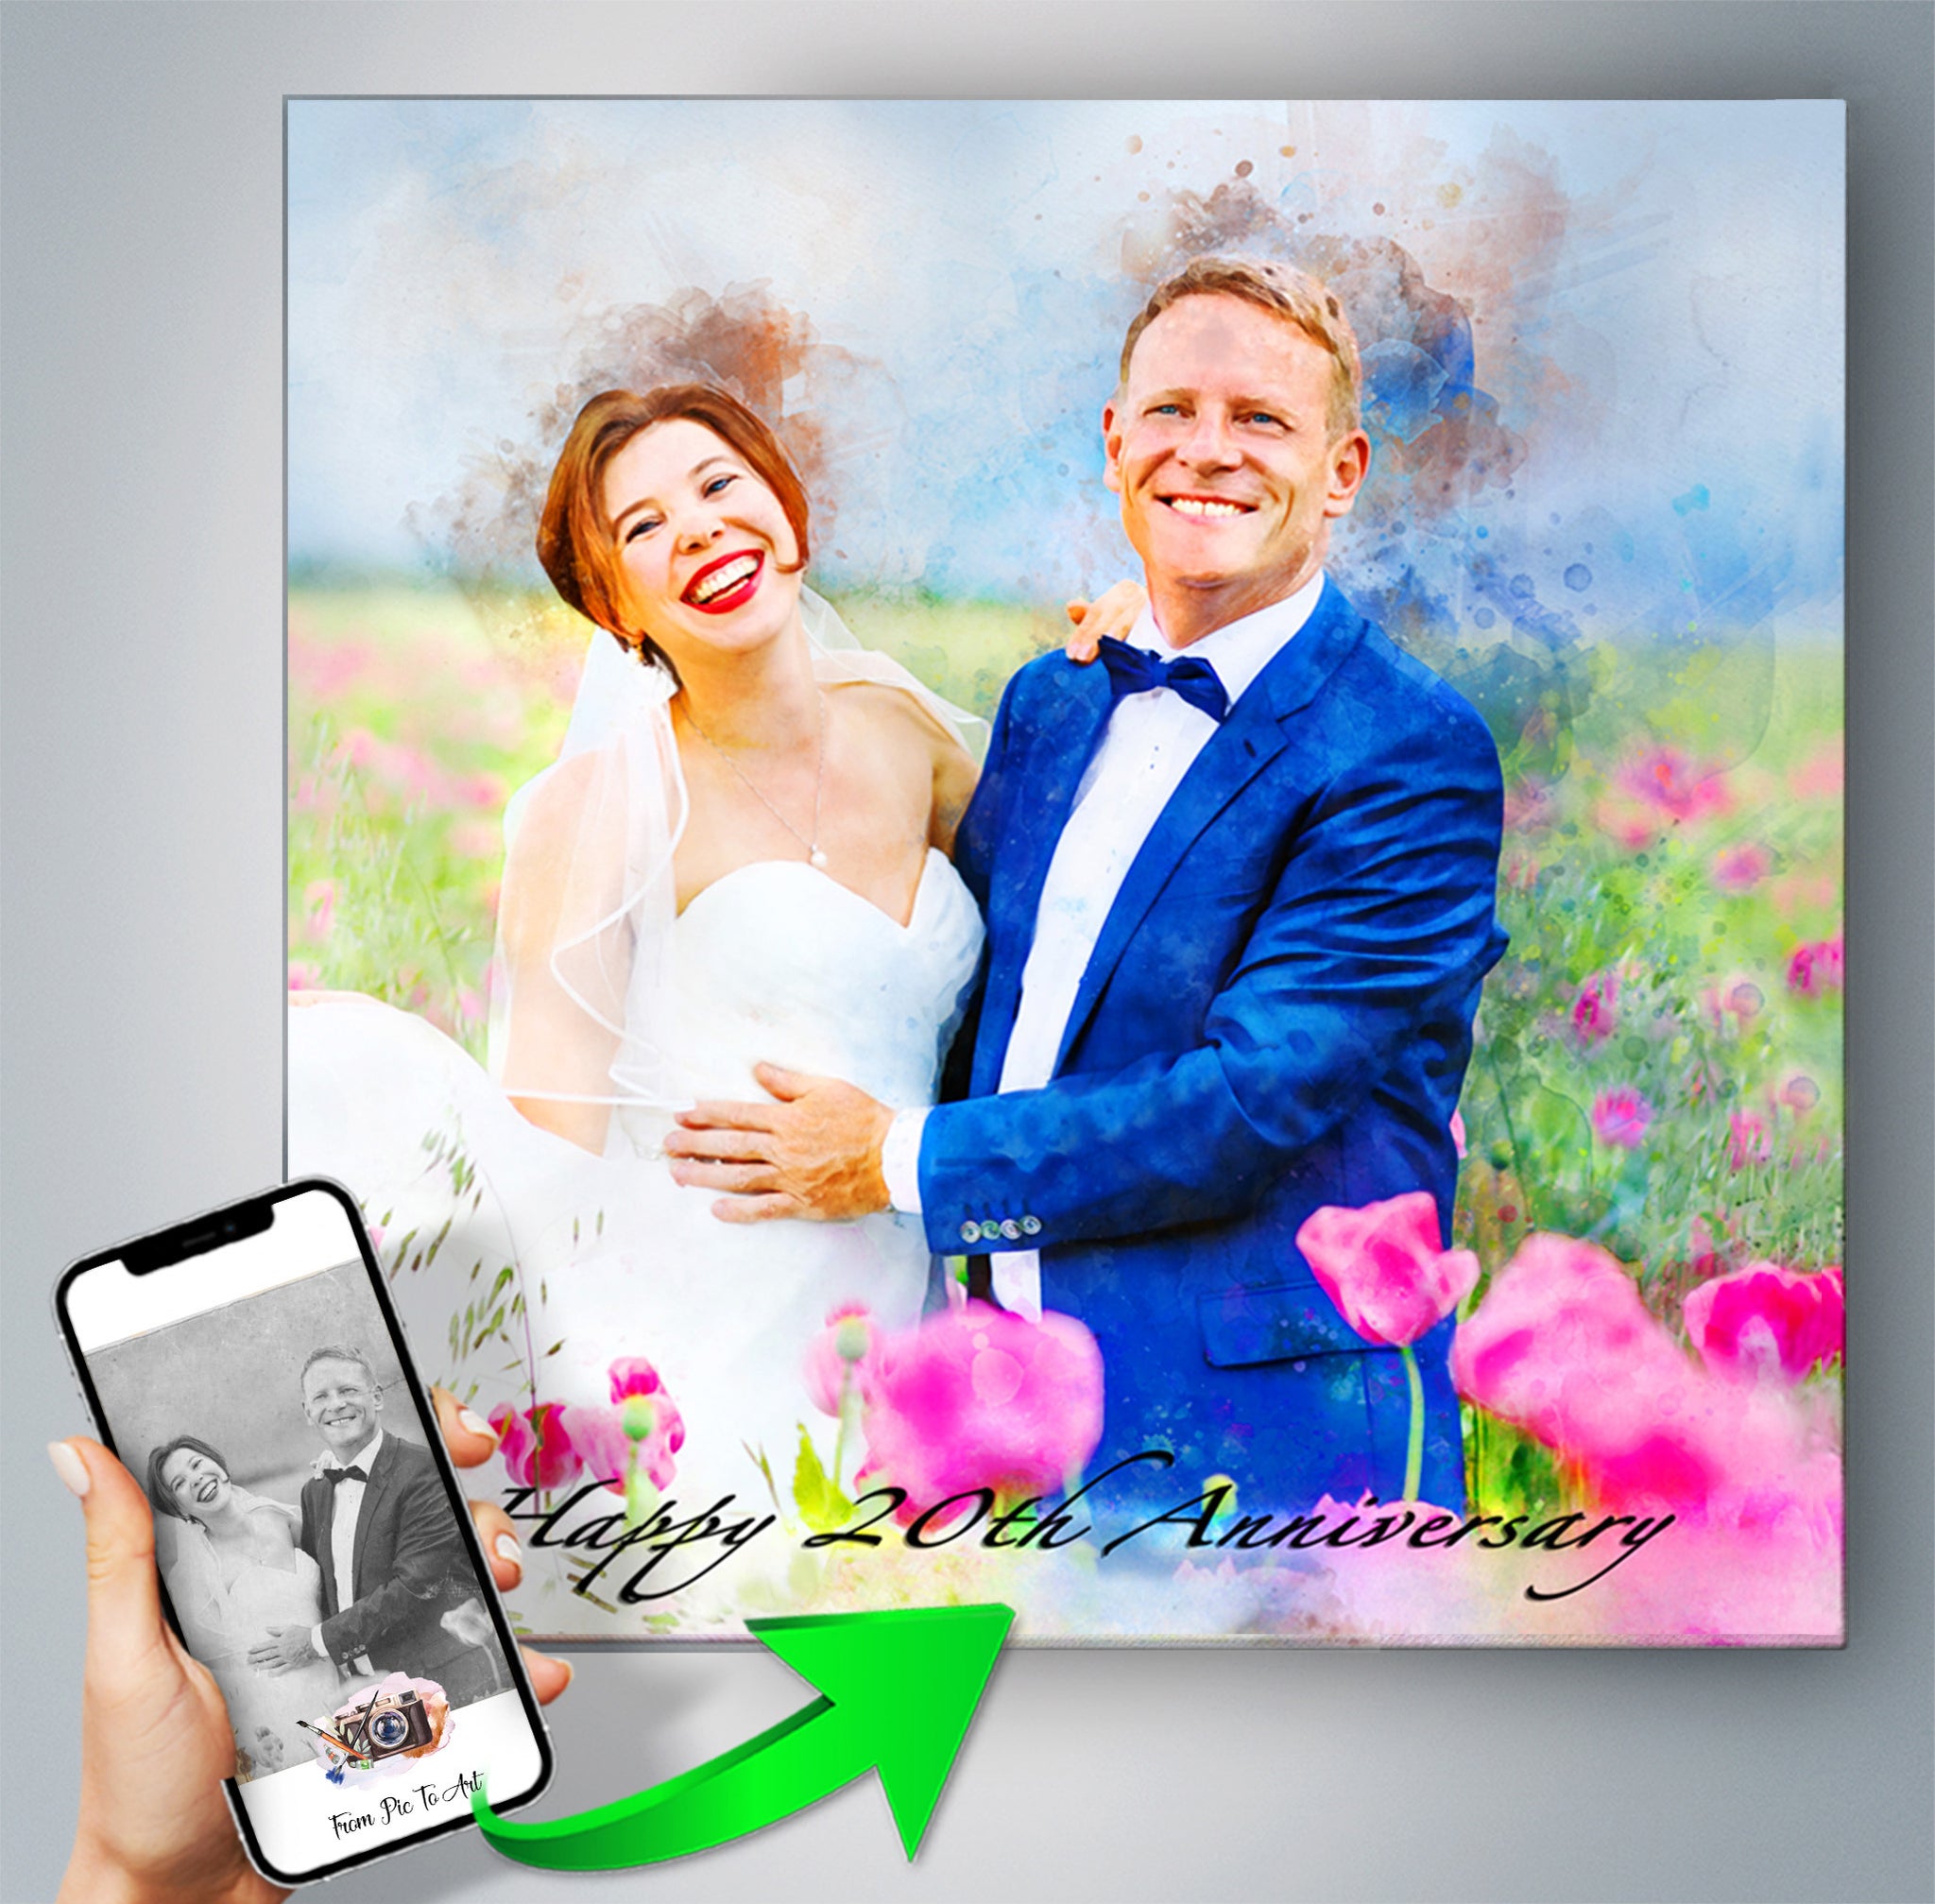 Wedding_Portrait_with_Couple_in_love_Turned_into_a_Romantic_Anniversary_Gift, FromPicToArt